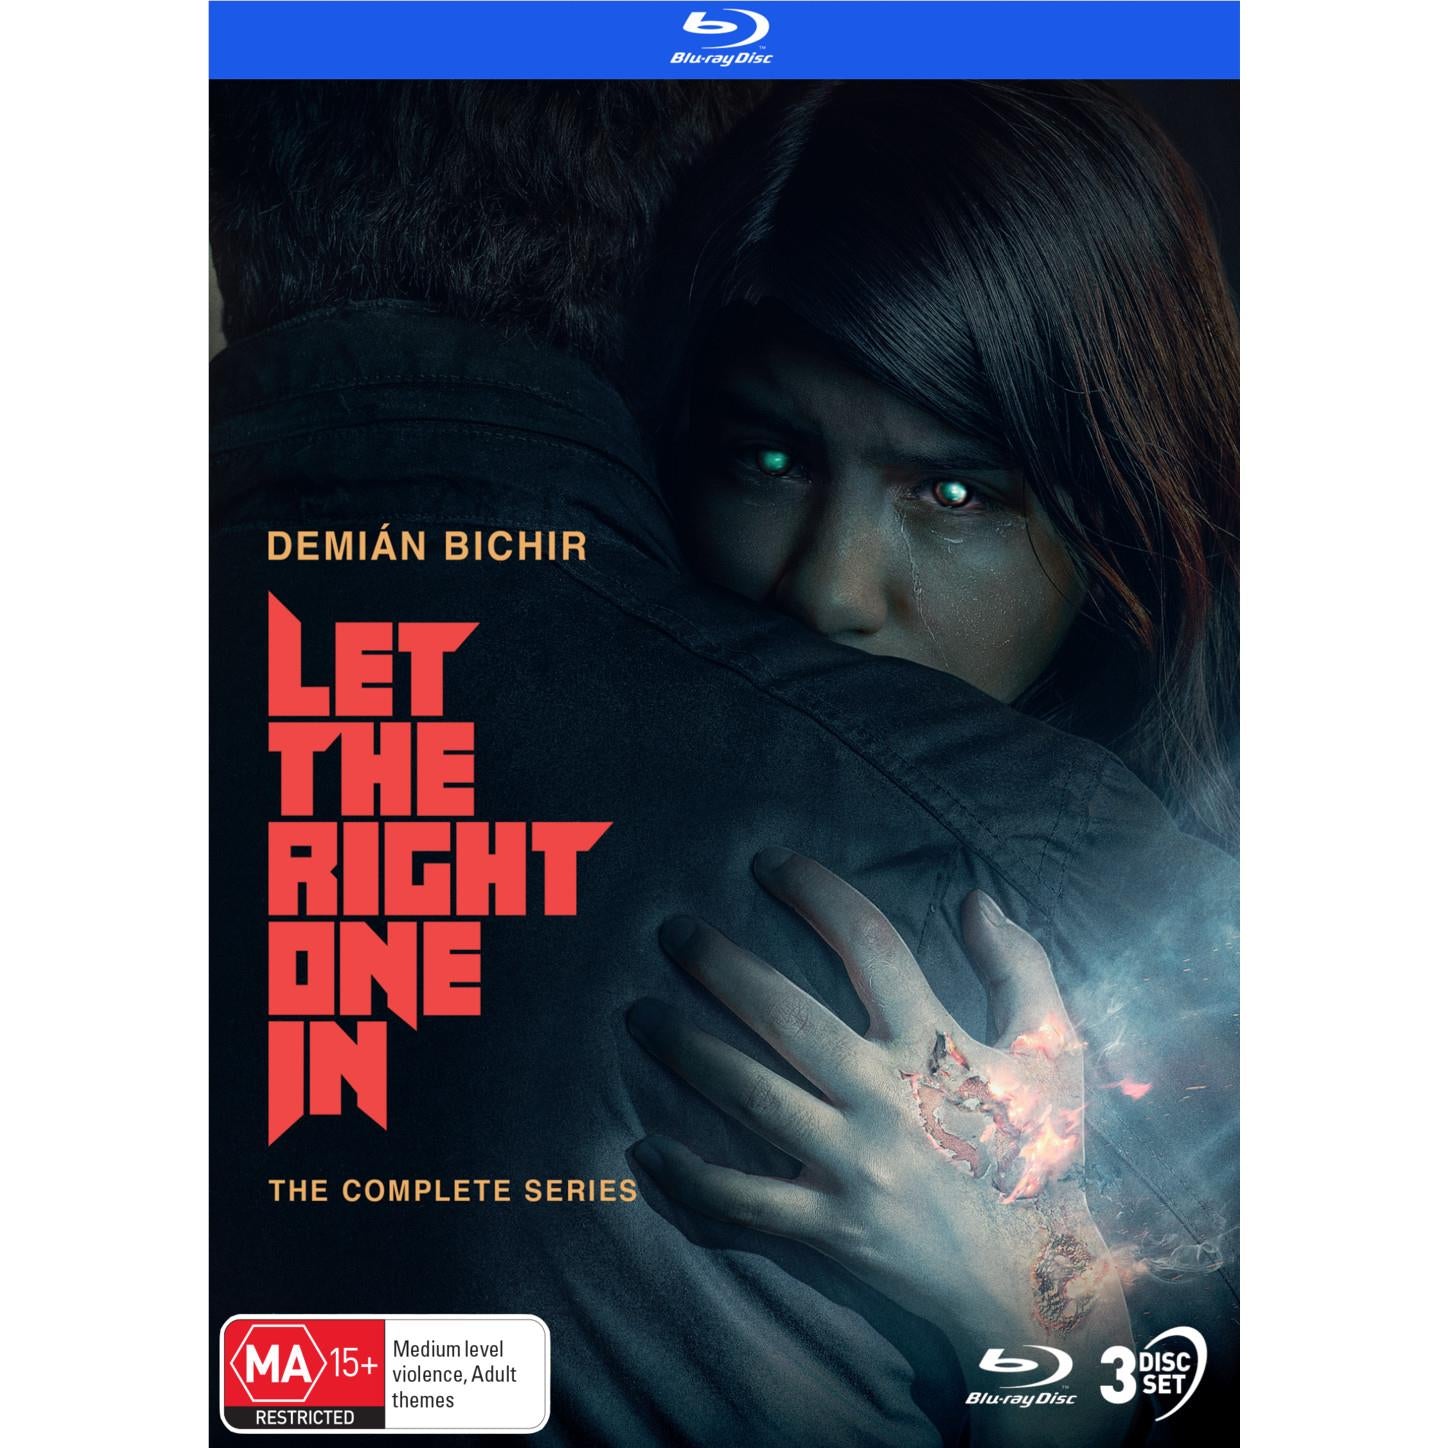 let the right one in - series 1